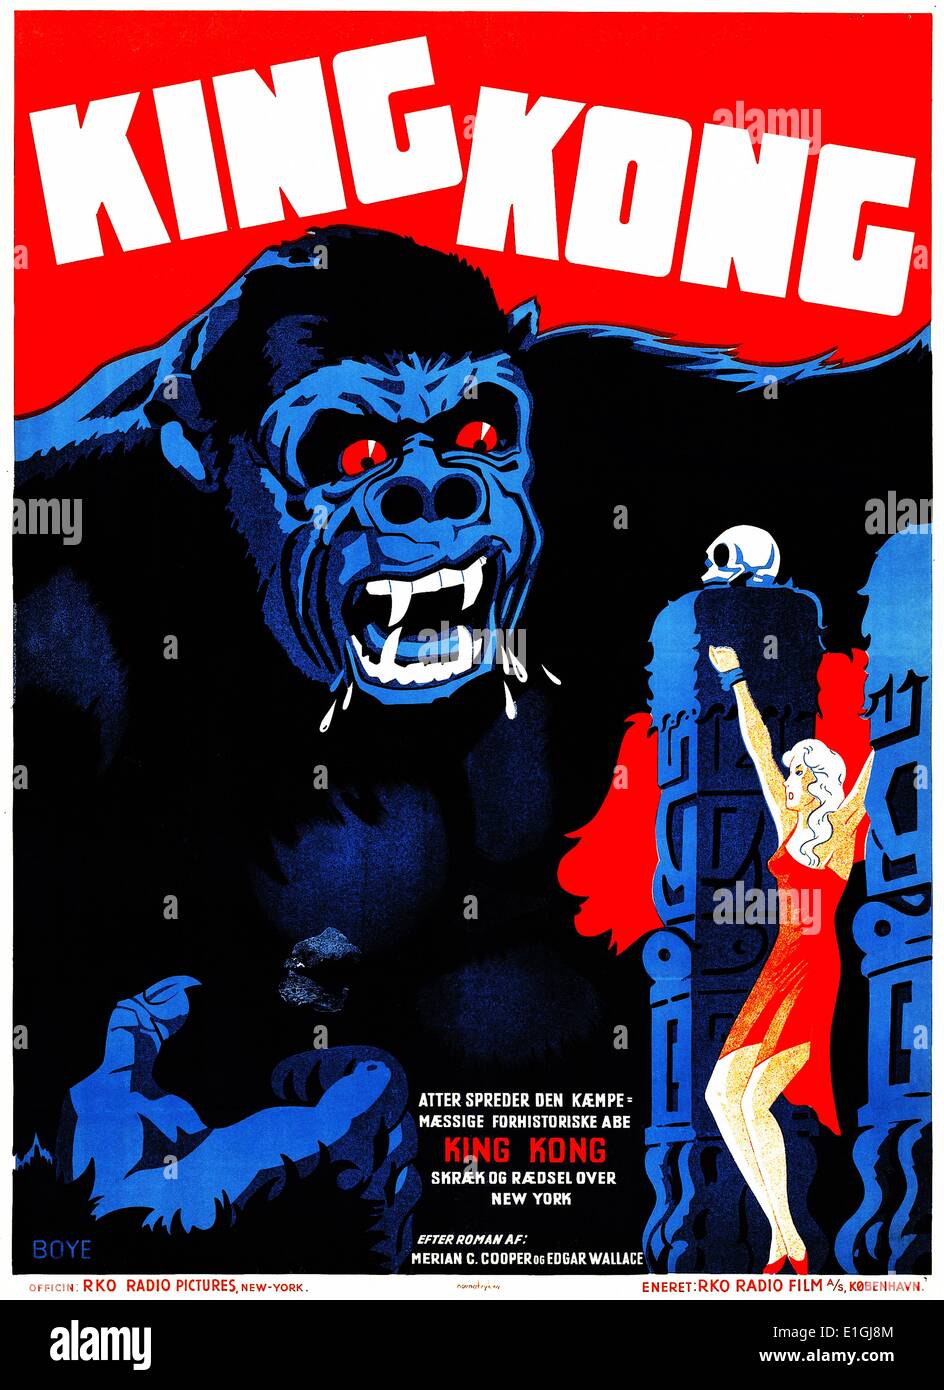 King Kong, a giant movie monster that has appeared in several movies since 1933. Stock Photo